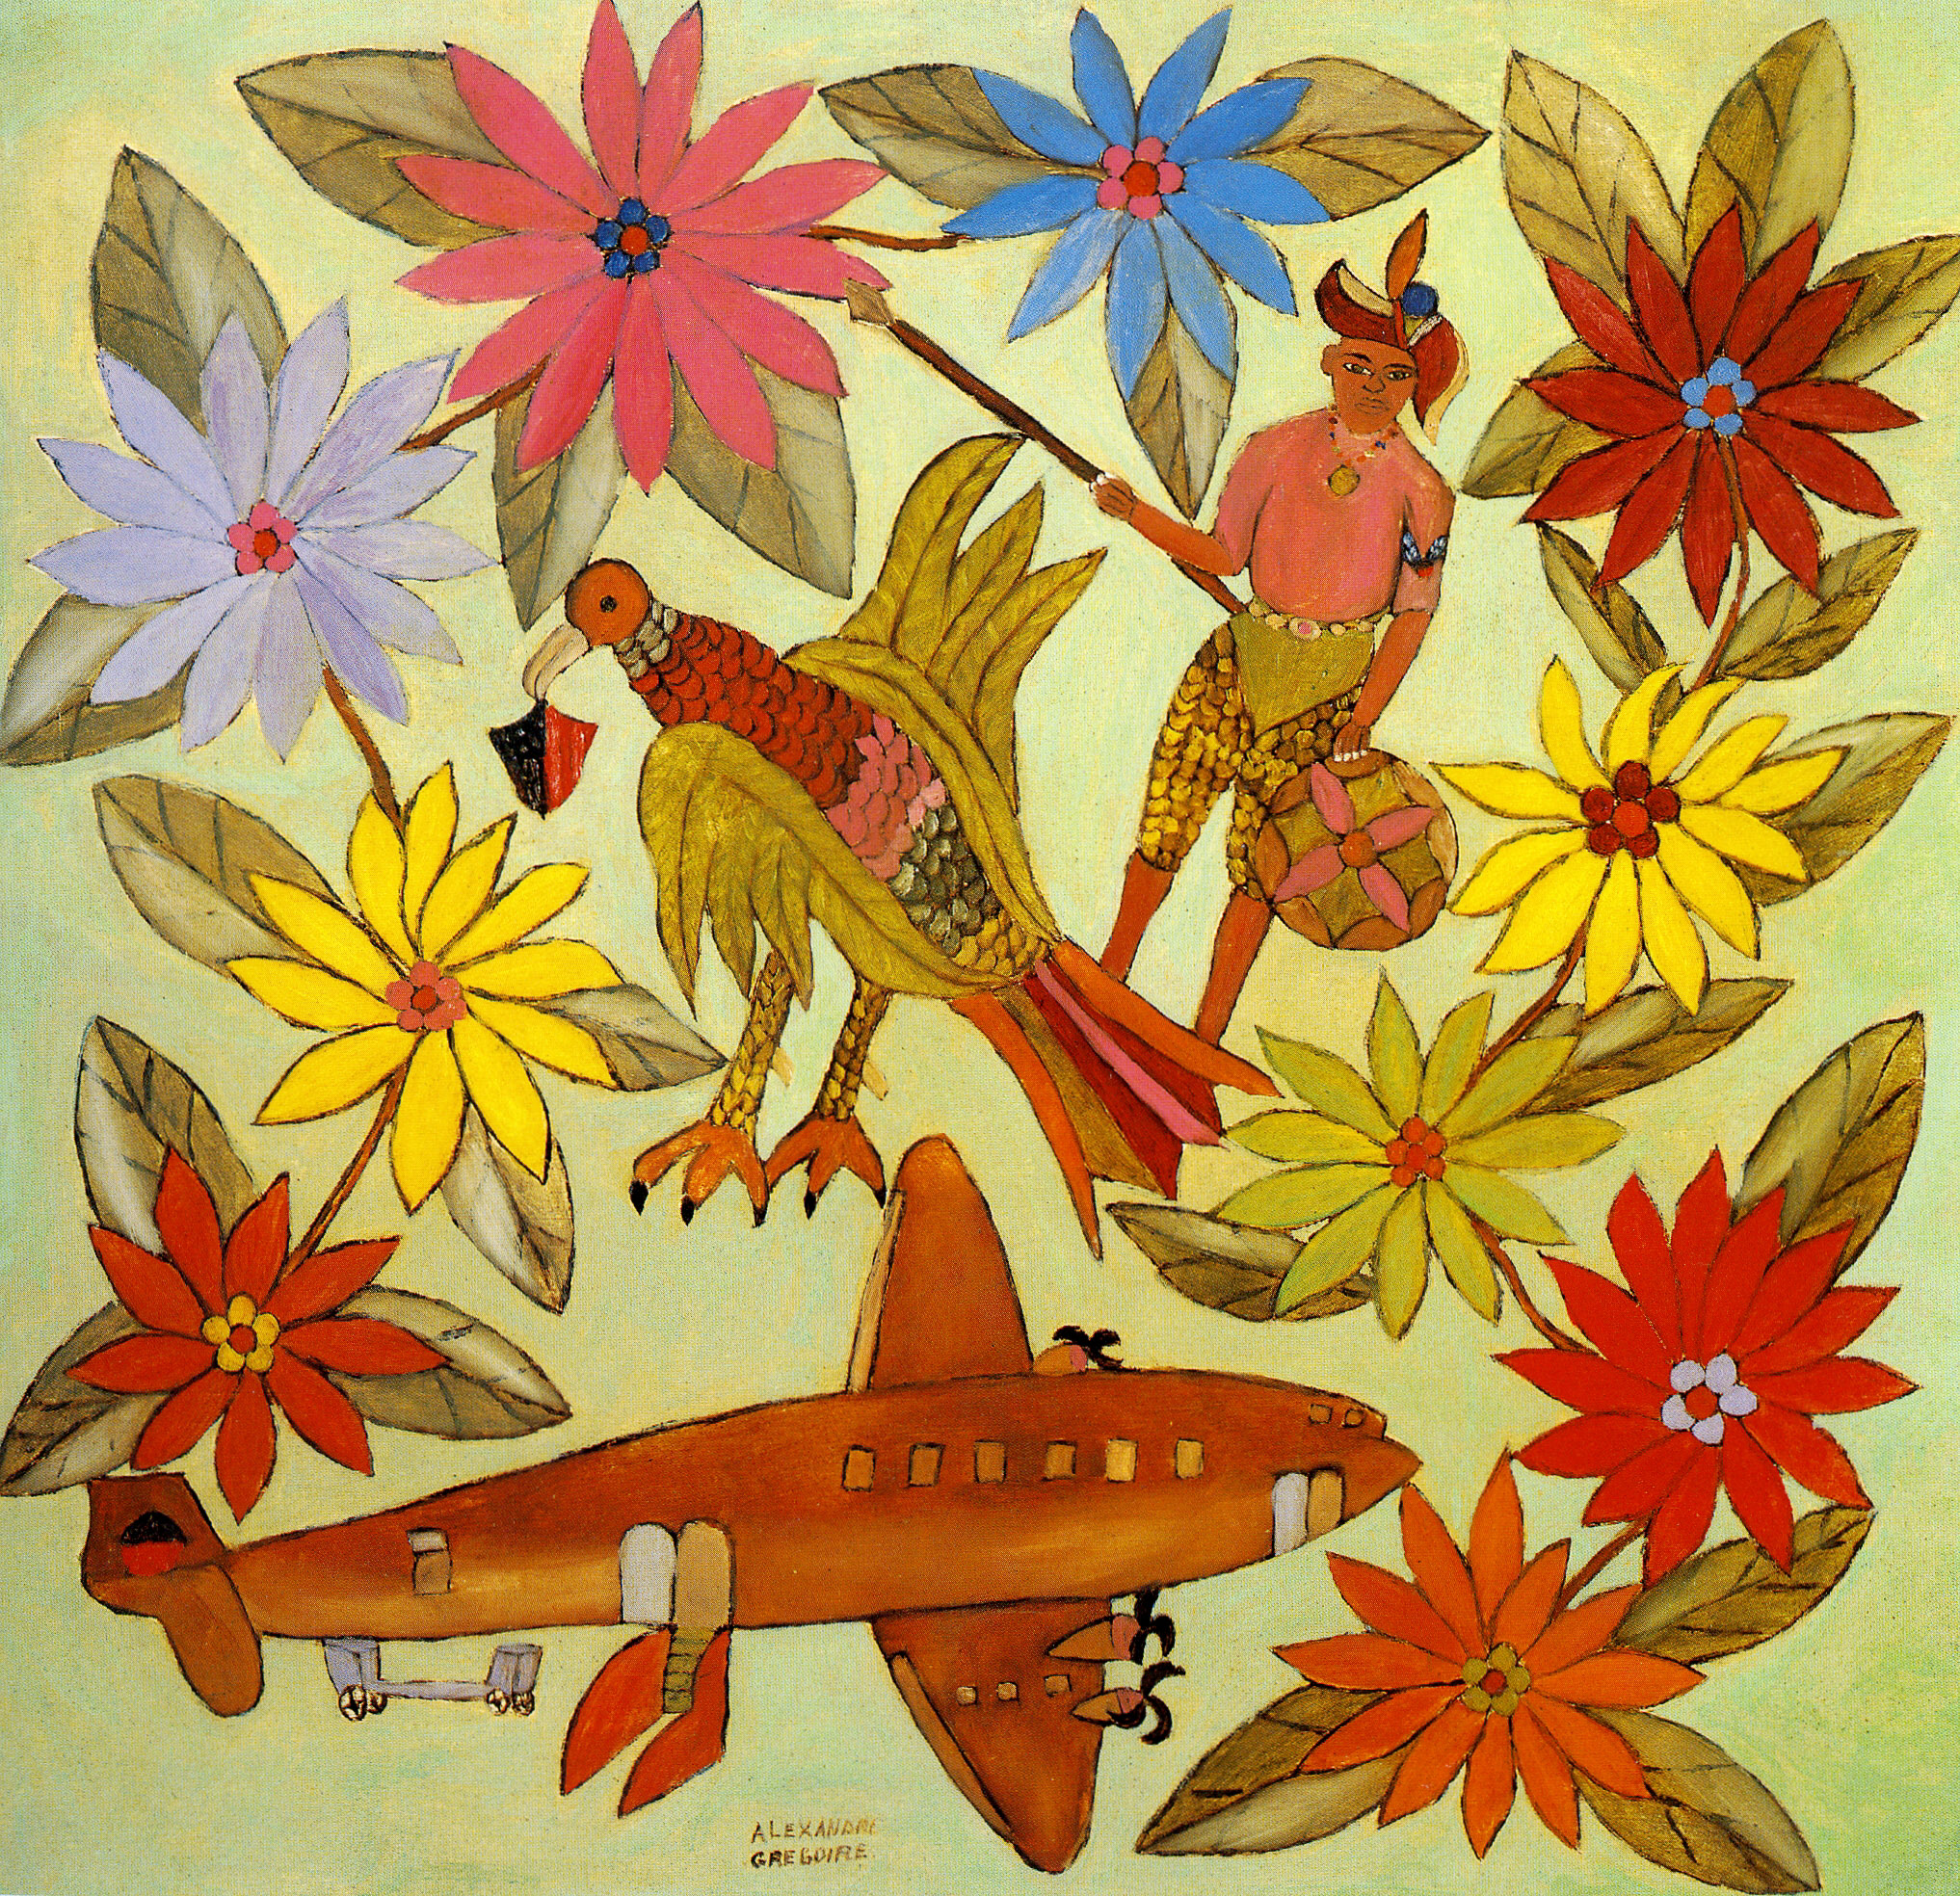 Flowers, Pentad with Haitian Crest, Indigenous Haitian and Air Haiti, 1960